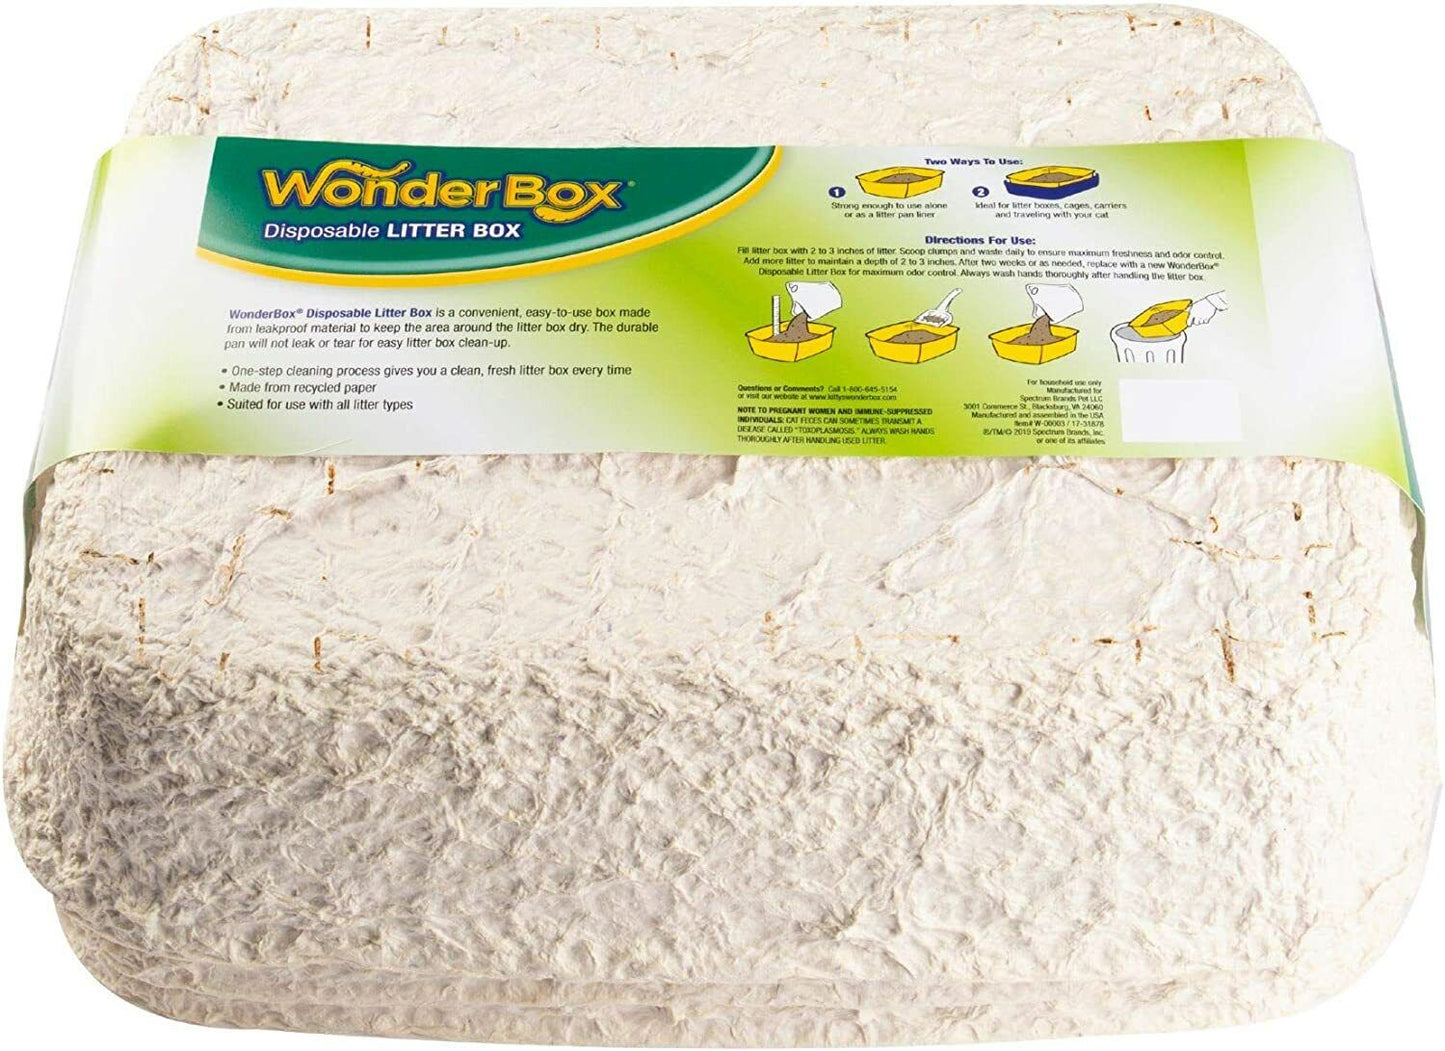 Kitty's Wonderbox 2 in 1 Disposable Liner & Litter Box, Leakproof, 3 Count